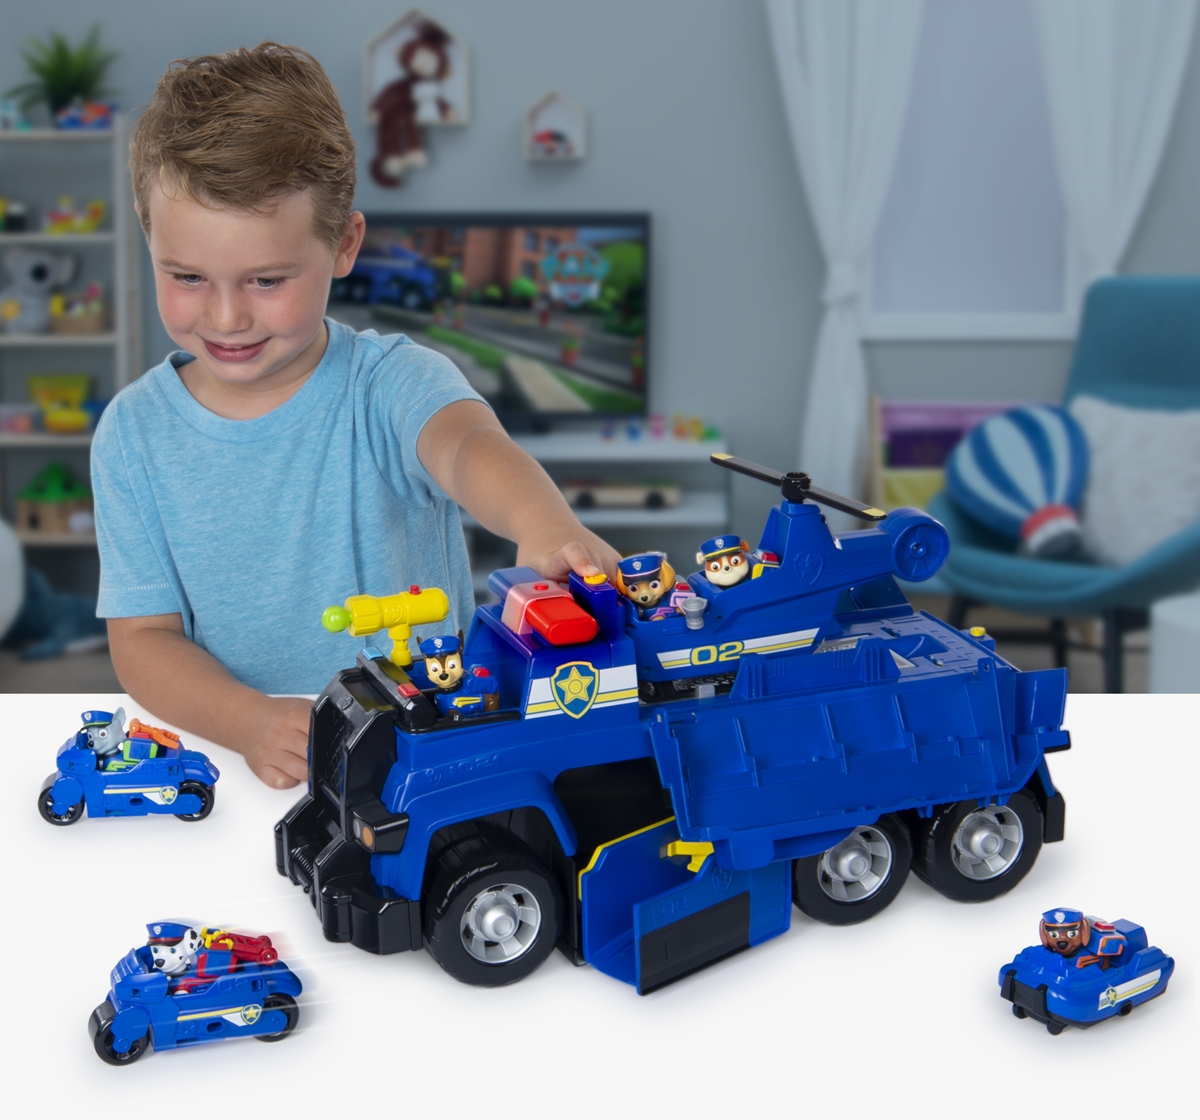 Paw Patrol | Paw Patrol Chase Dluxe Cruser Roleplay Set for Kids 3Y+, Blue 2